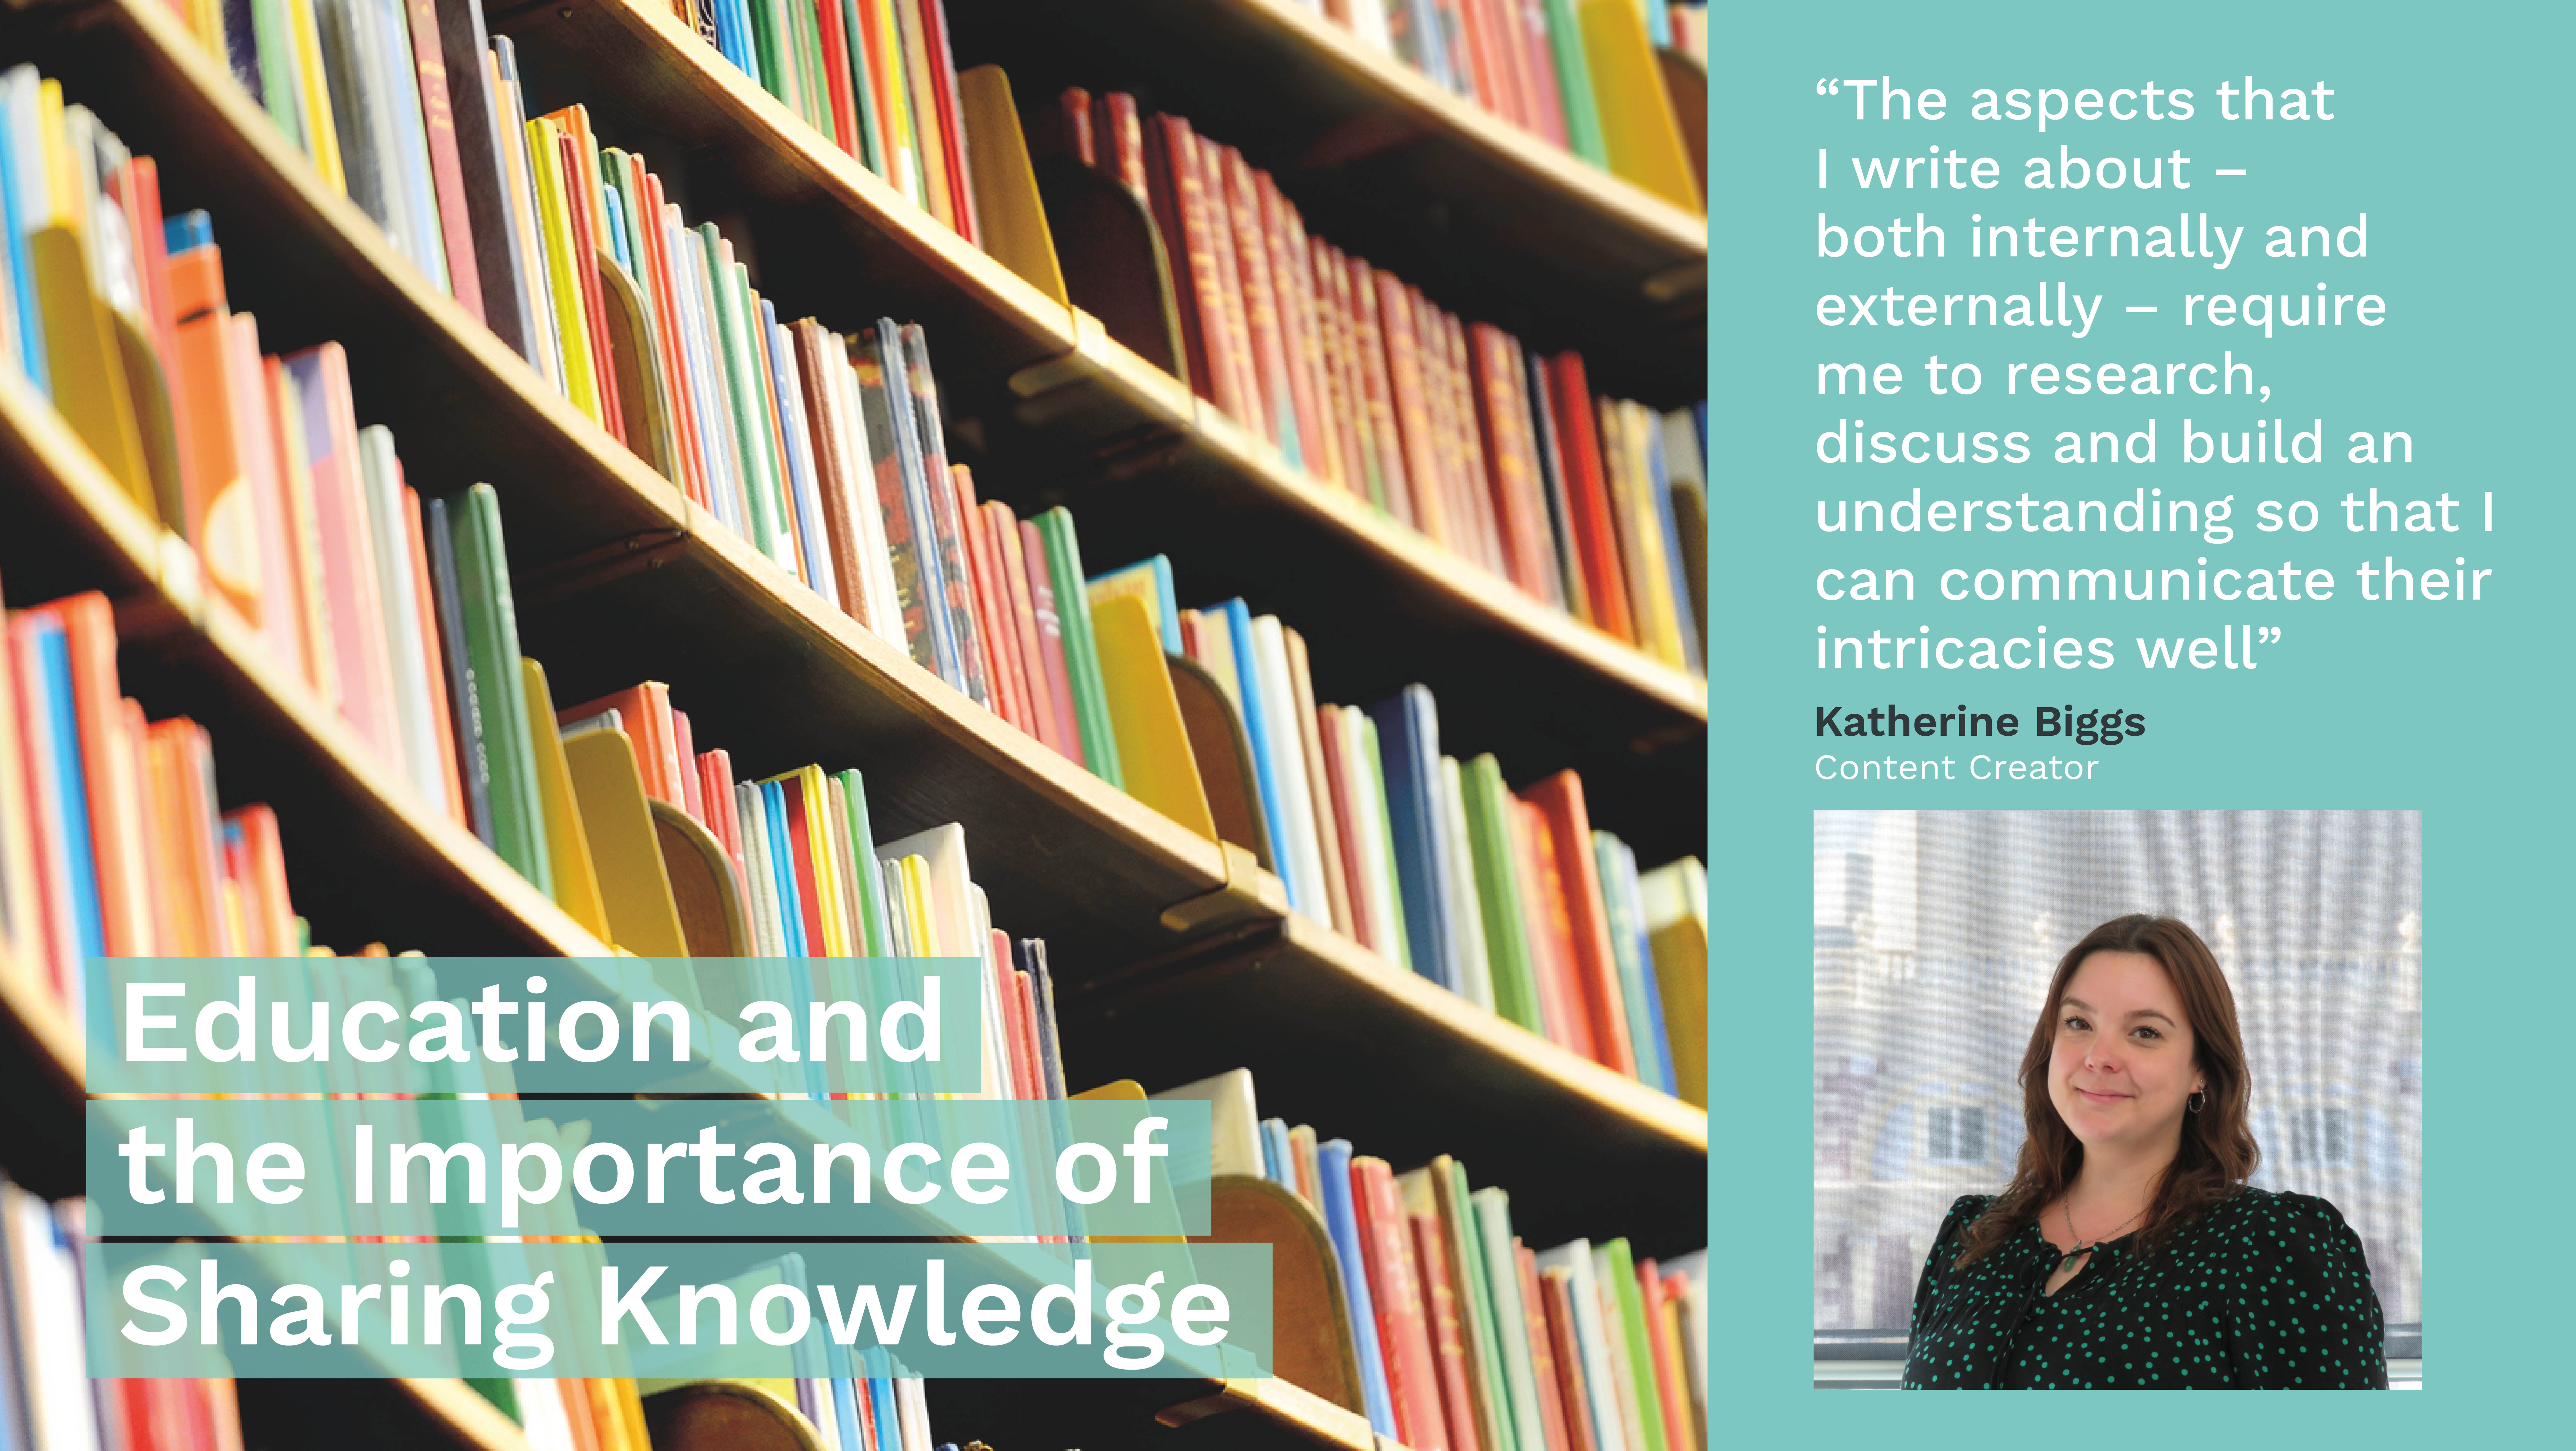 Katherine Biggs on Sustainability - Education and the Importance of Sharing Knowledge